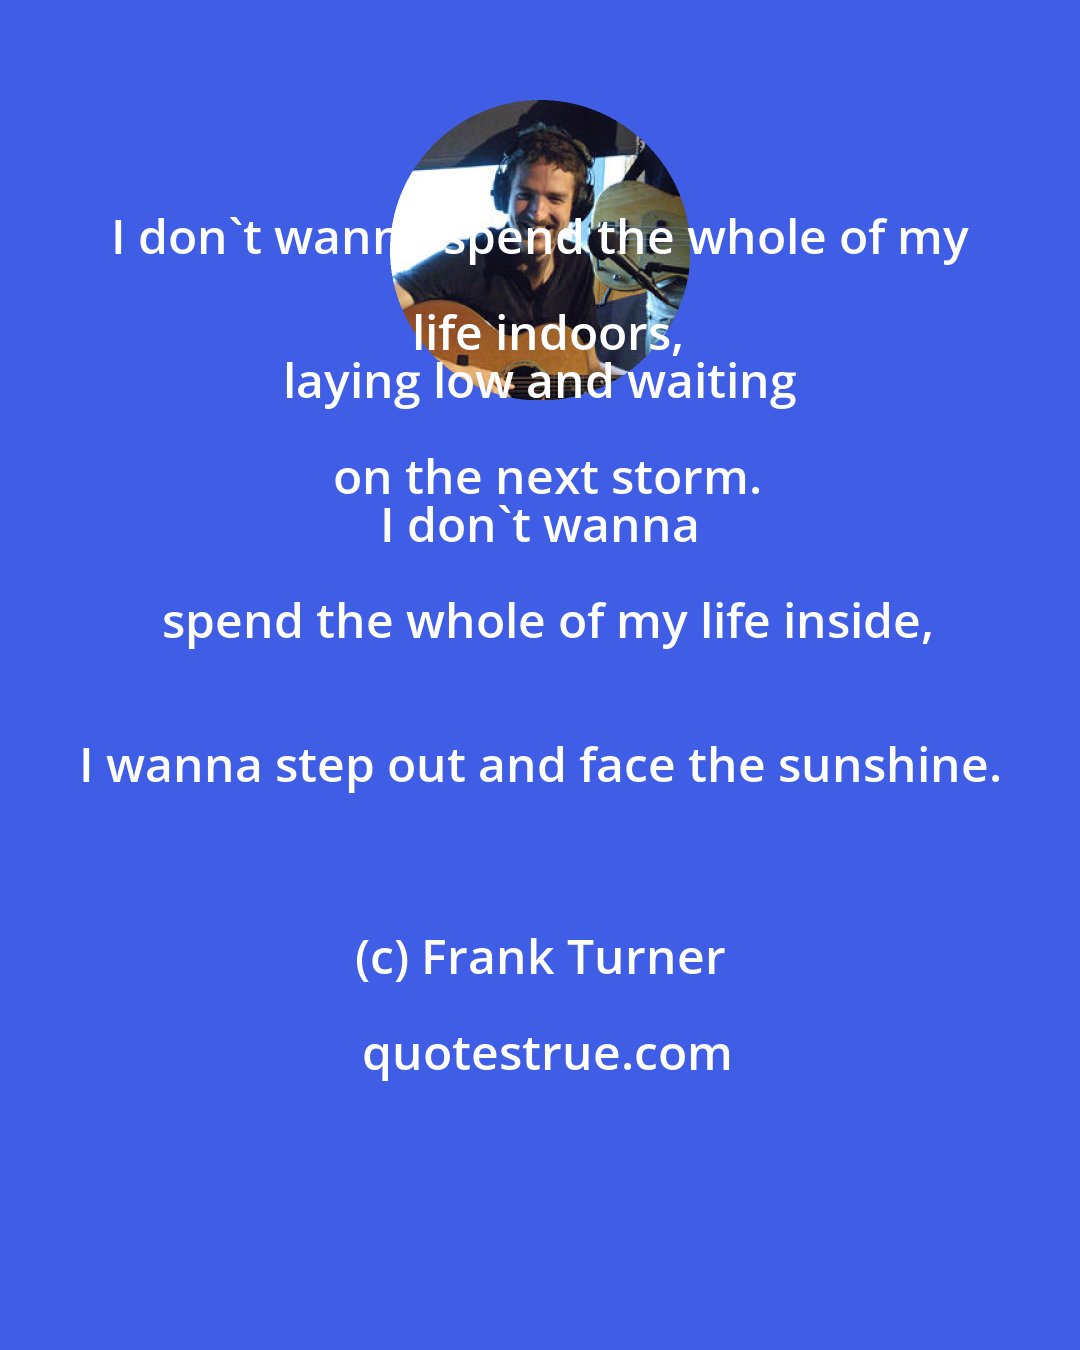 Frank Turner: I don't wanna spend the whole of my life indoors,
 laying low and waiting on the next storm.
 I don't wanna spend the whole of my life inside,
 I wanna step out and face the sunshine.